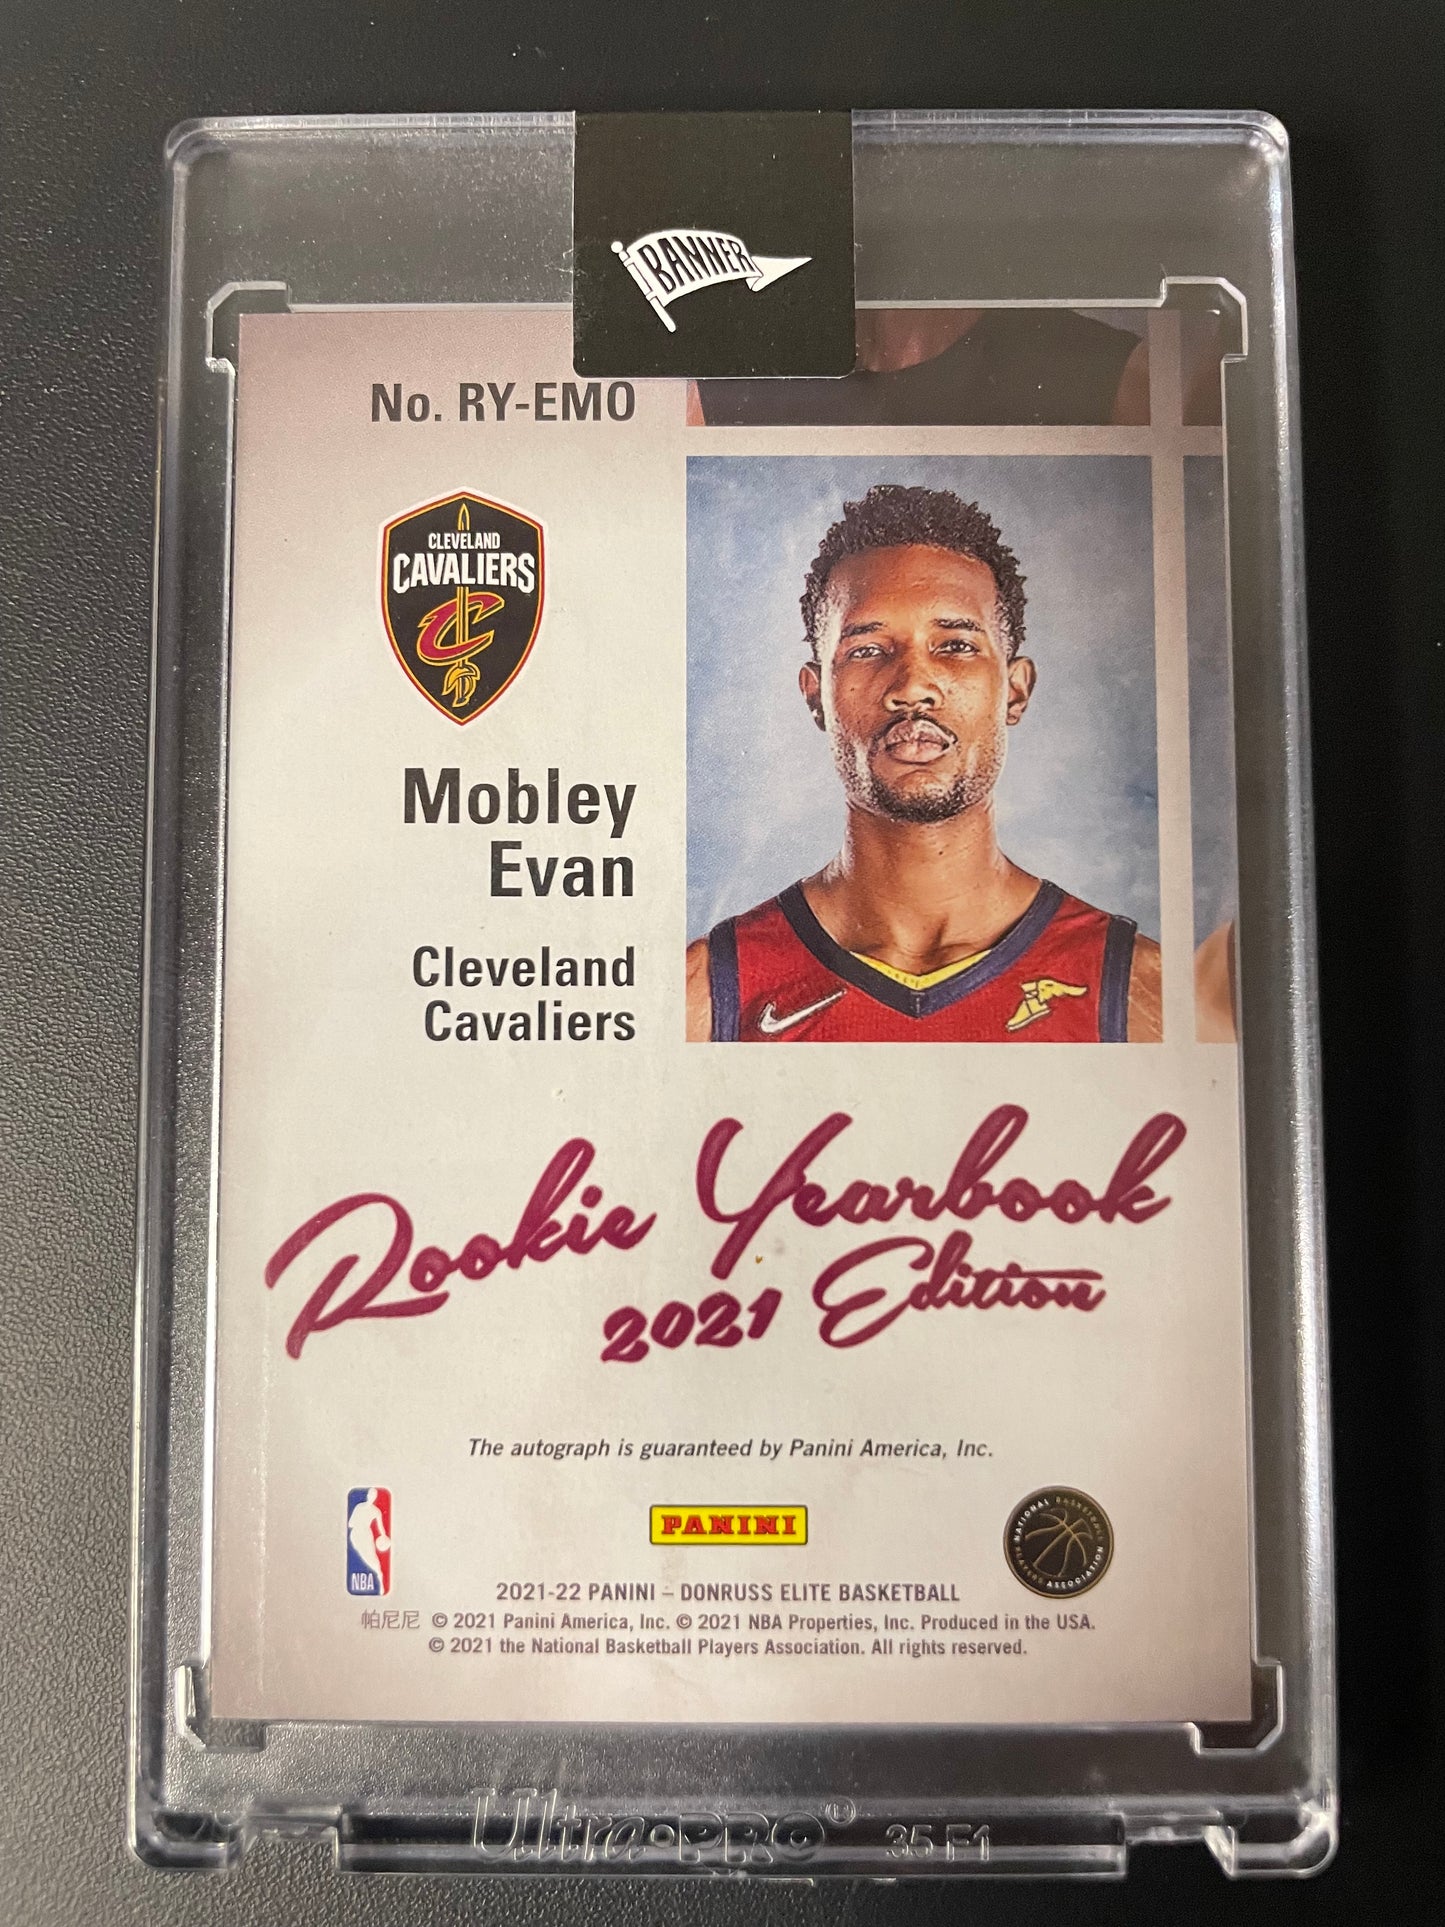 2021/22 Panini Donruss Elite #3 Evan Mobley Cleveland Cavillers Rookie Yearbook Autographs RC